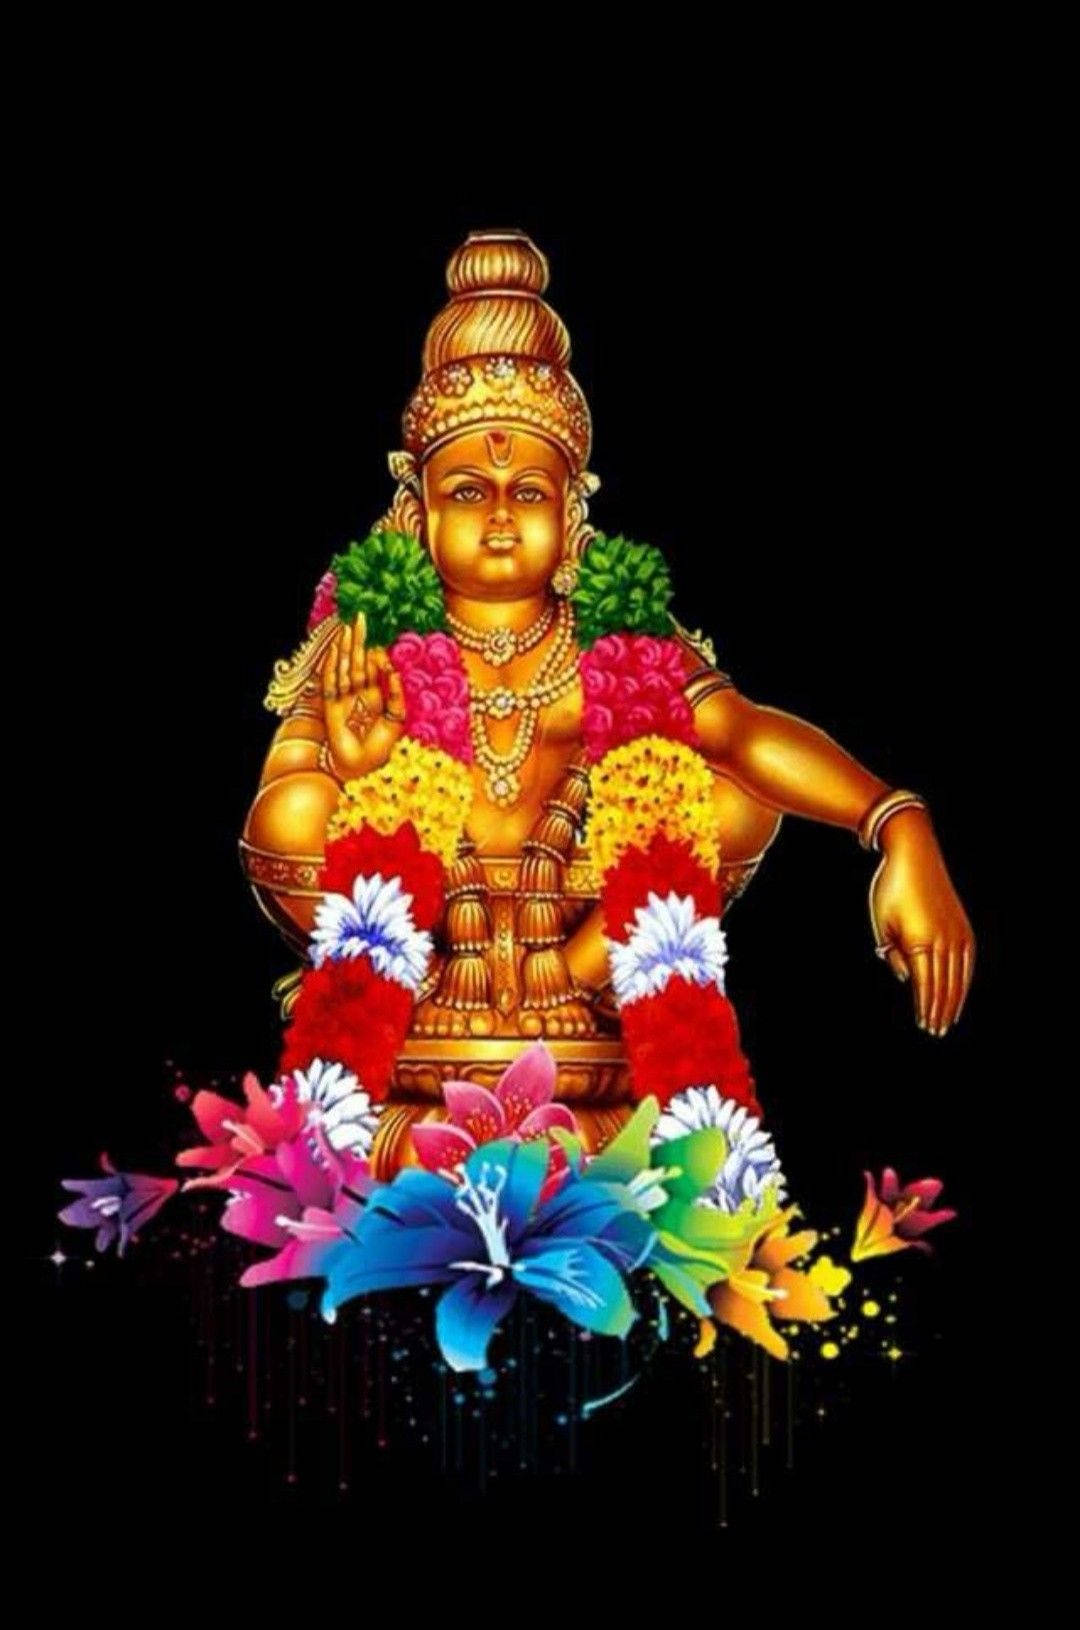 Download Lord Ayyappa On Black Background Wallpaper | Wallpapers.com